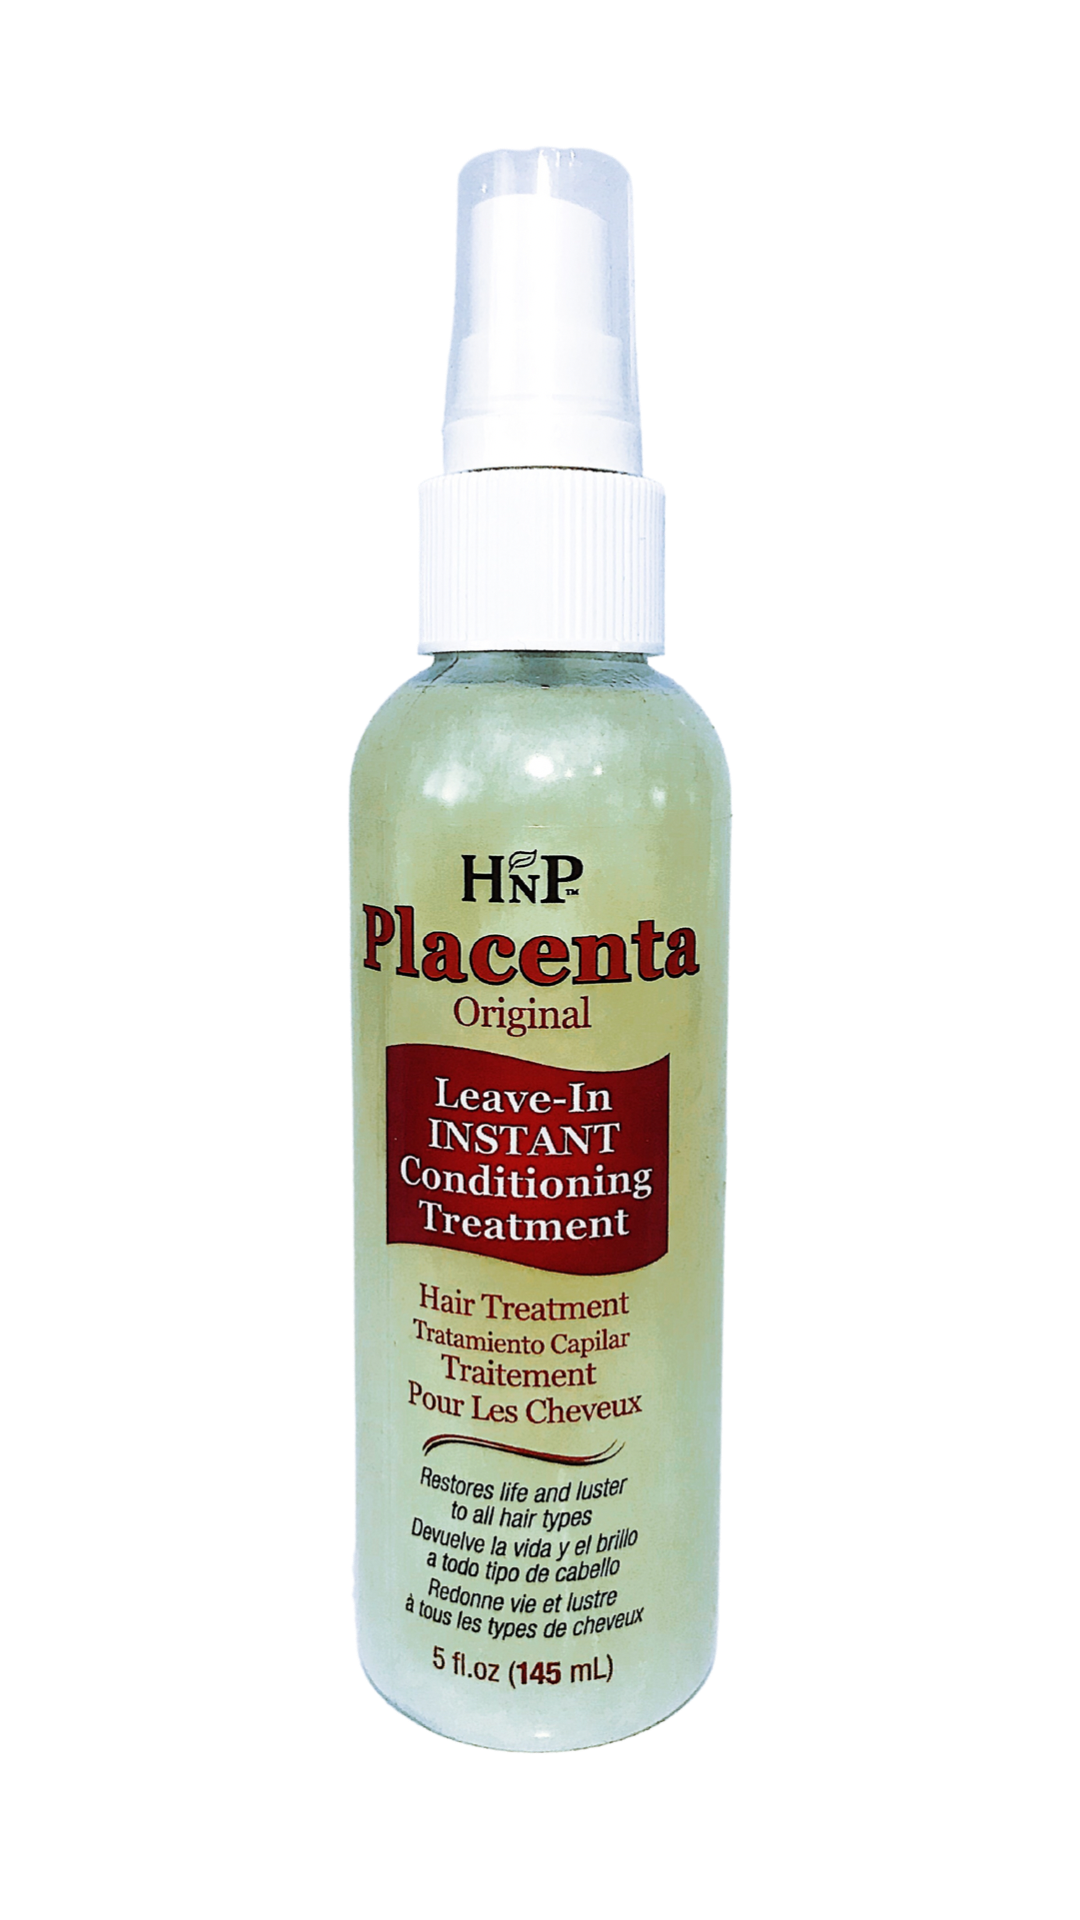 HnP-Placenta-Leave-In-Instant-Conditioning-Treatment.jpg